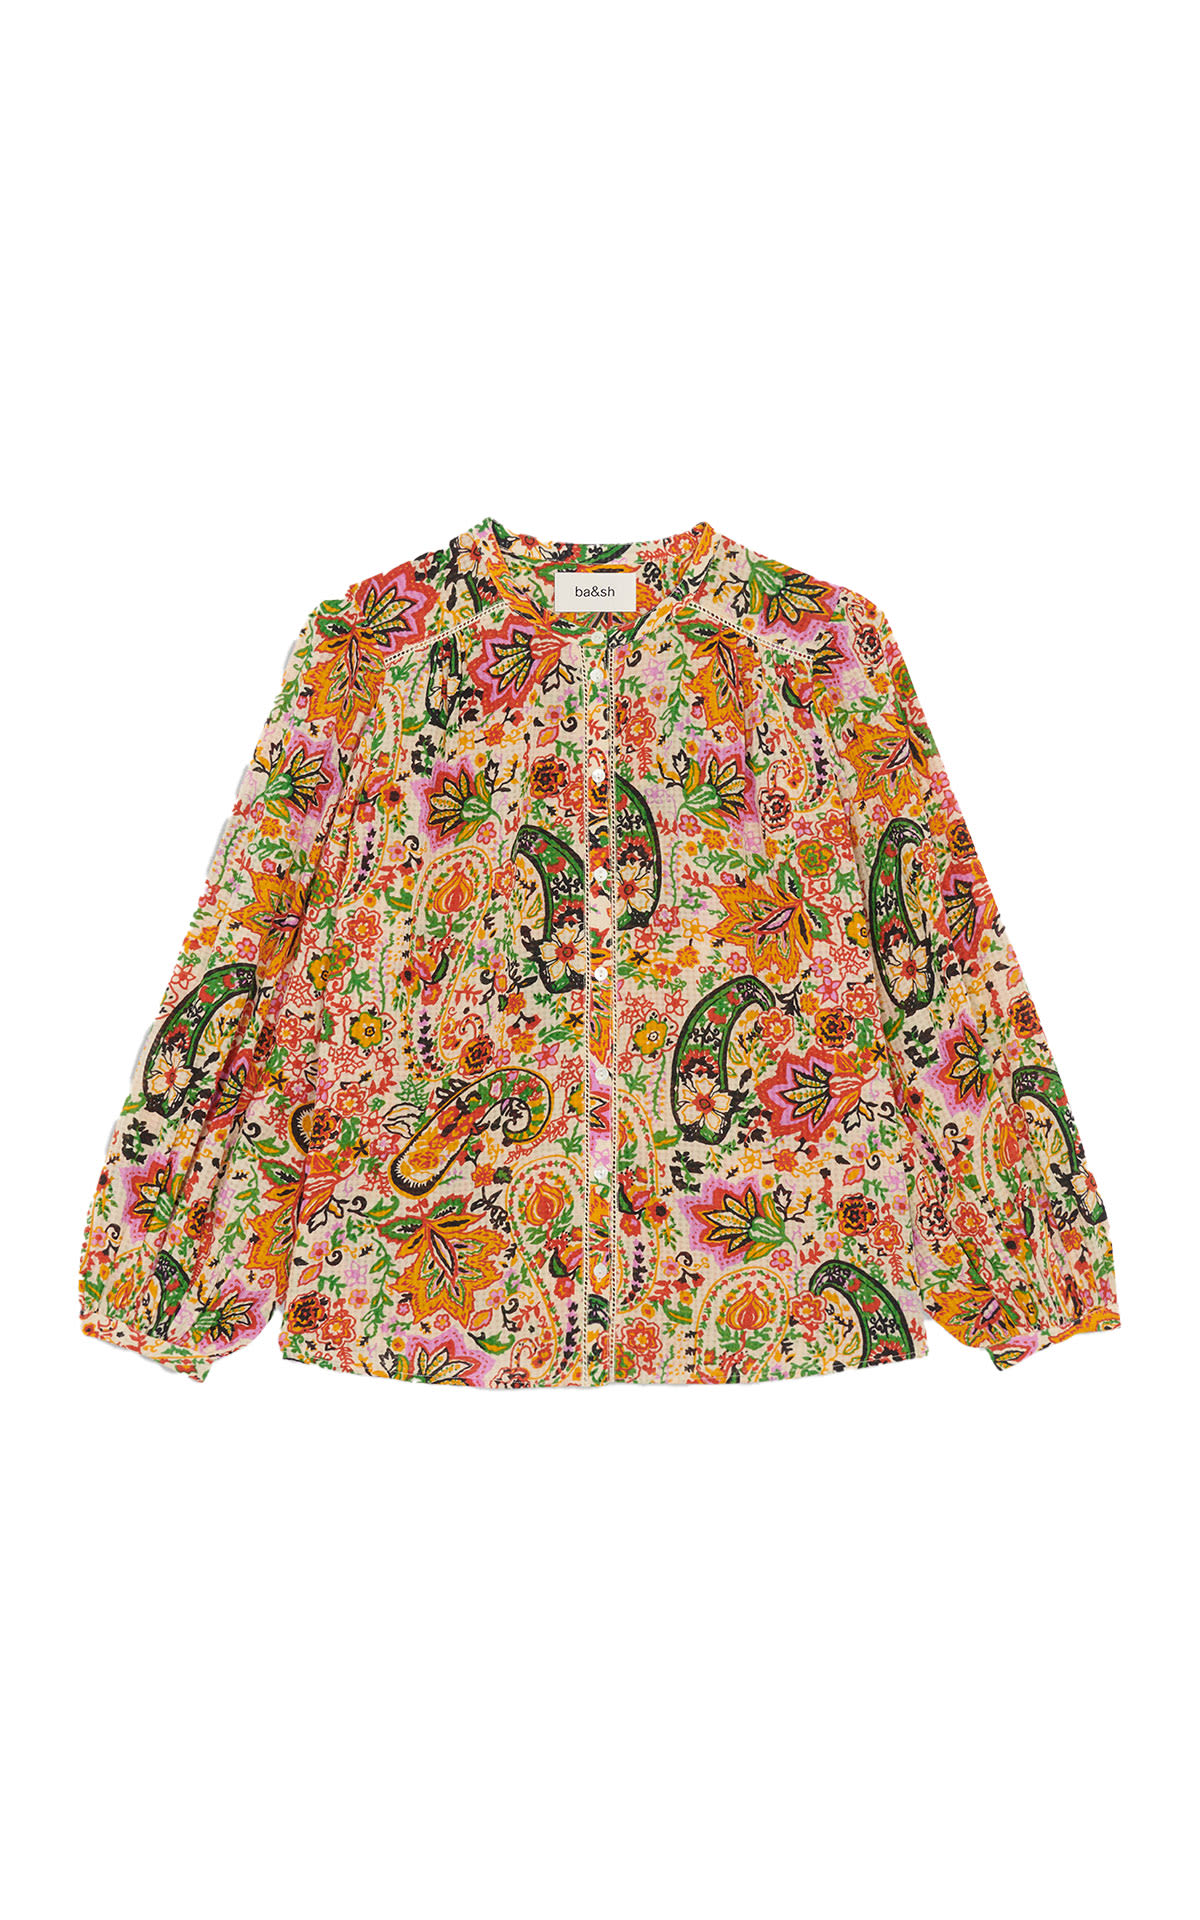 ba&sh Bianca blouse from Bicester Village